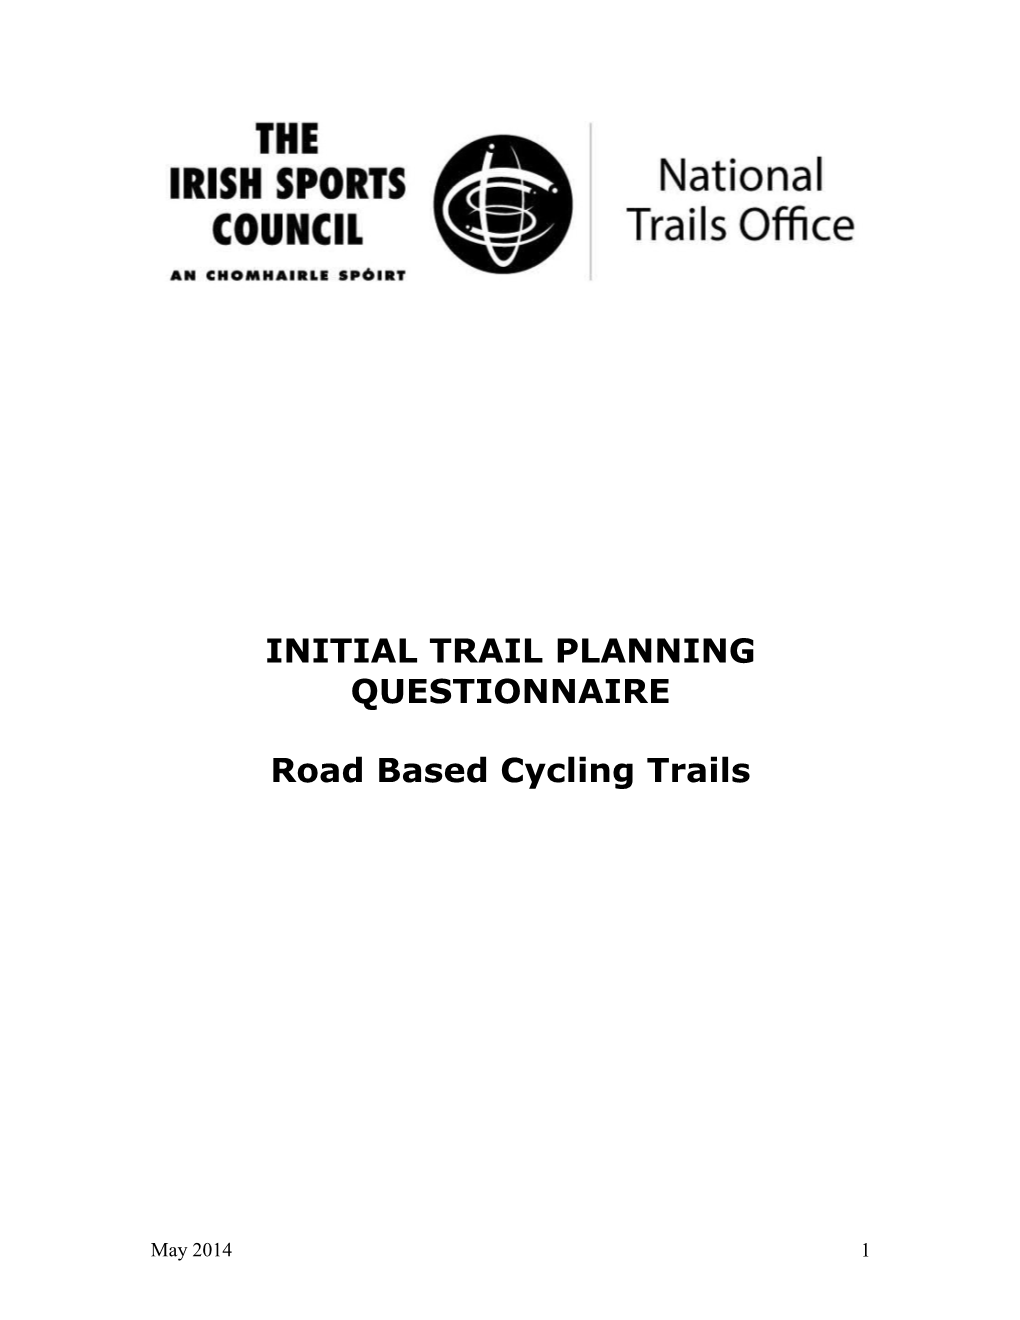 Walking Trail Planning Questionnaire